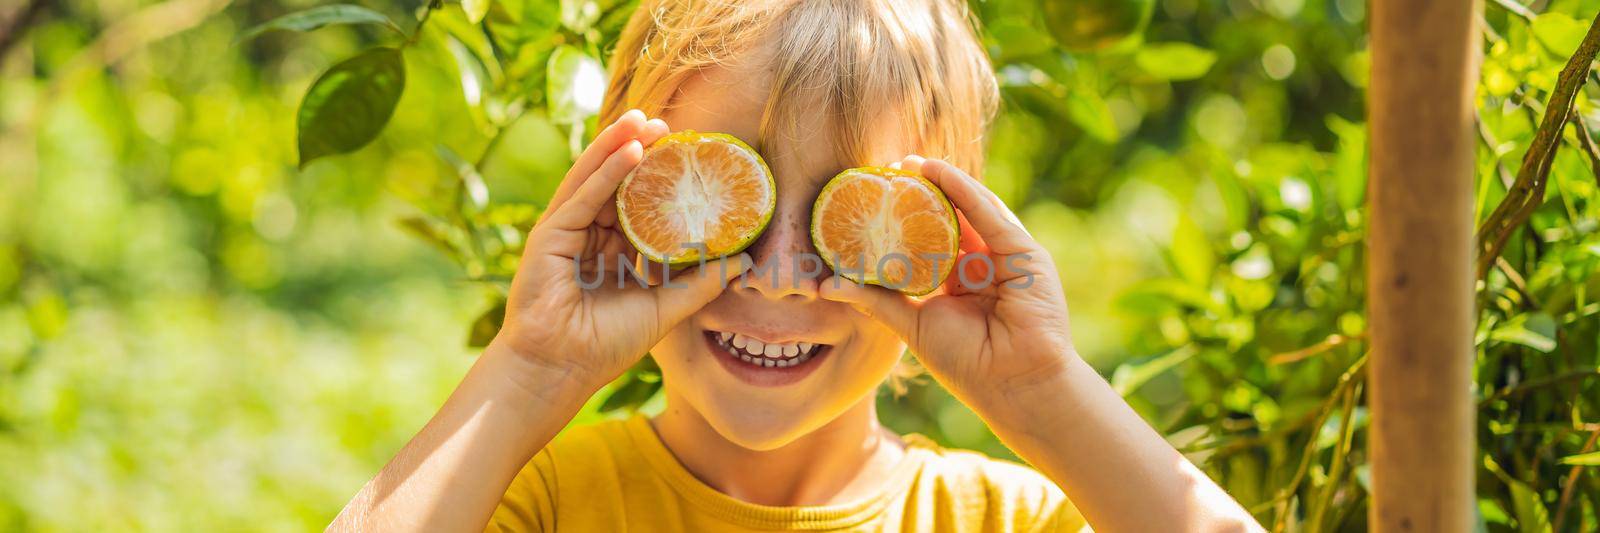 Cute boy in the garden collects tangerines BANNER, LONG FORMAT by galitskaya